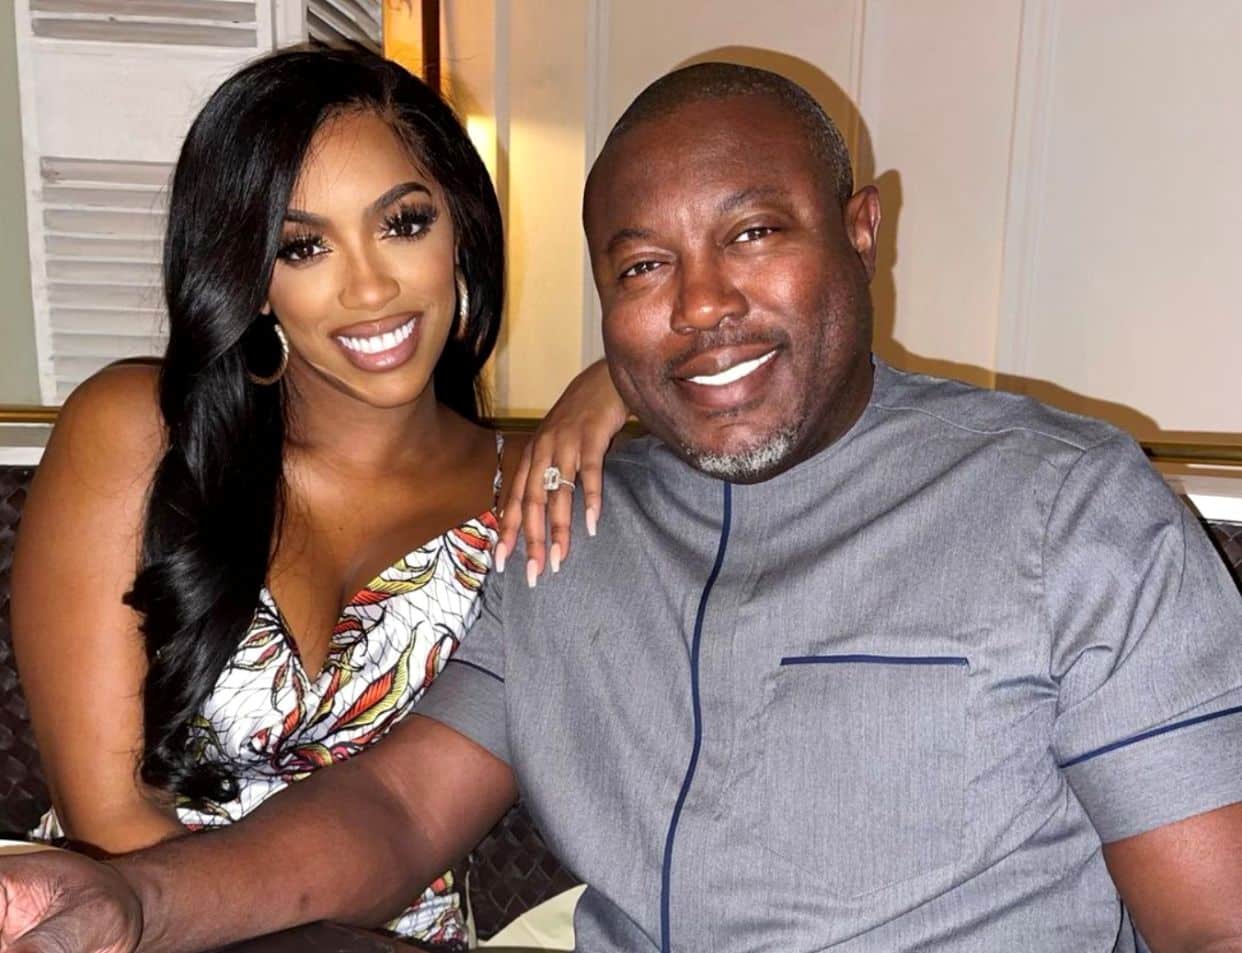 PHOTOS: Porsha Williams Marries Simon Guobadia in Traditional Nigerian Ceremony! See Pics From RHOA Alum’s Event as She Prepares for 2nd Wedding and Talks More Kids